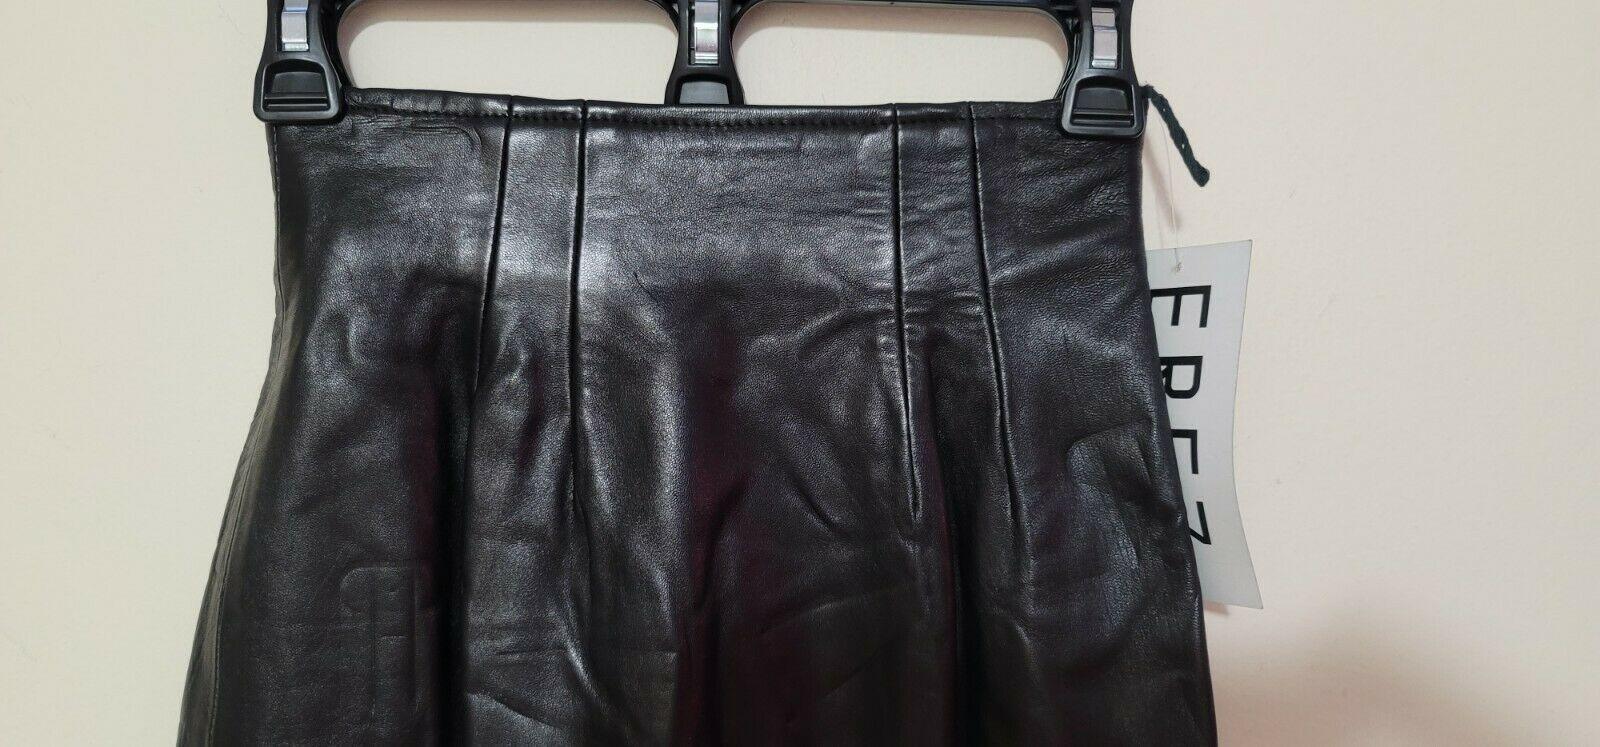 EREZ Lamb Leather High Waist Skirt Fitted Pencil Skirt Soft Leather Size 6 - SVNYFancy